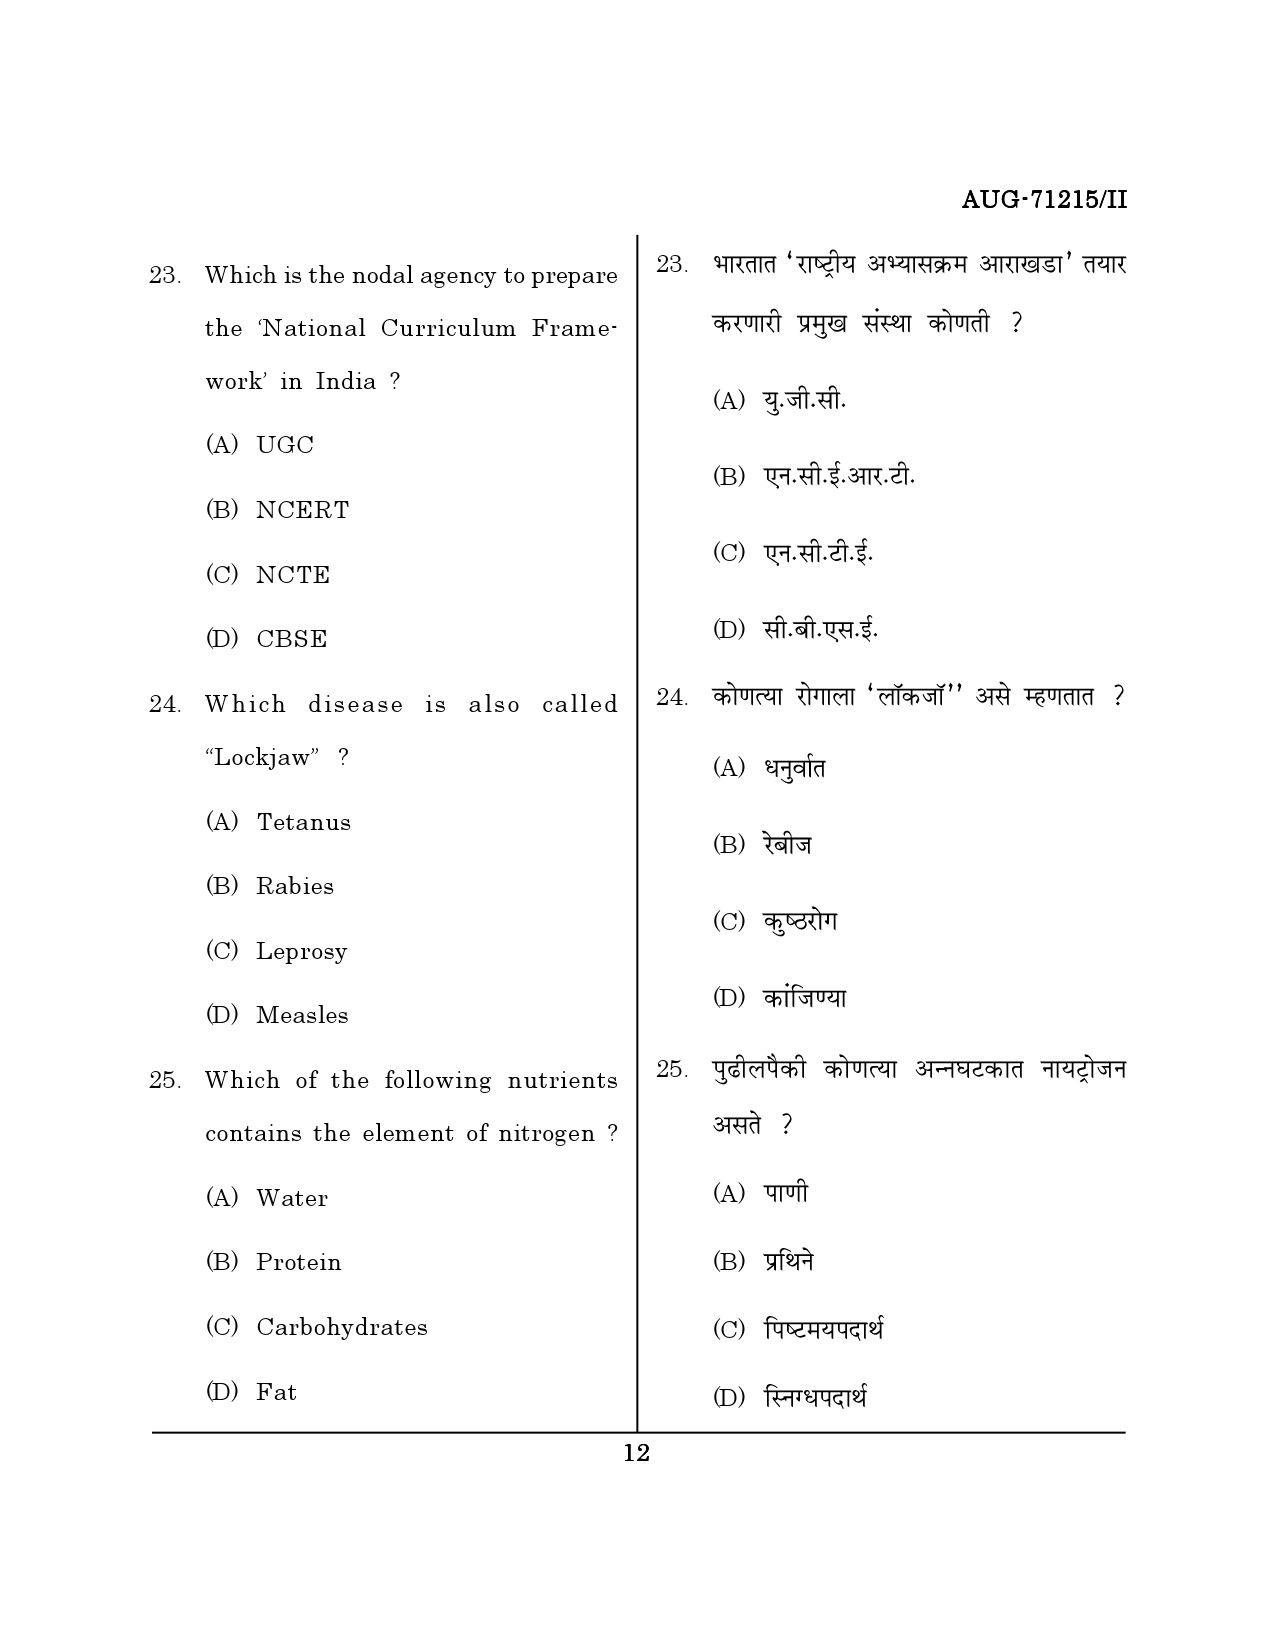 Maharashtra SET Physical Education Question Paper II August 2015 11